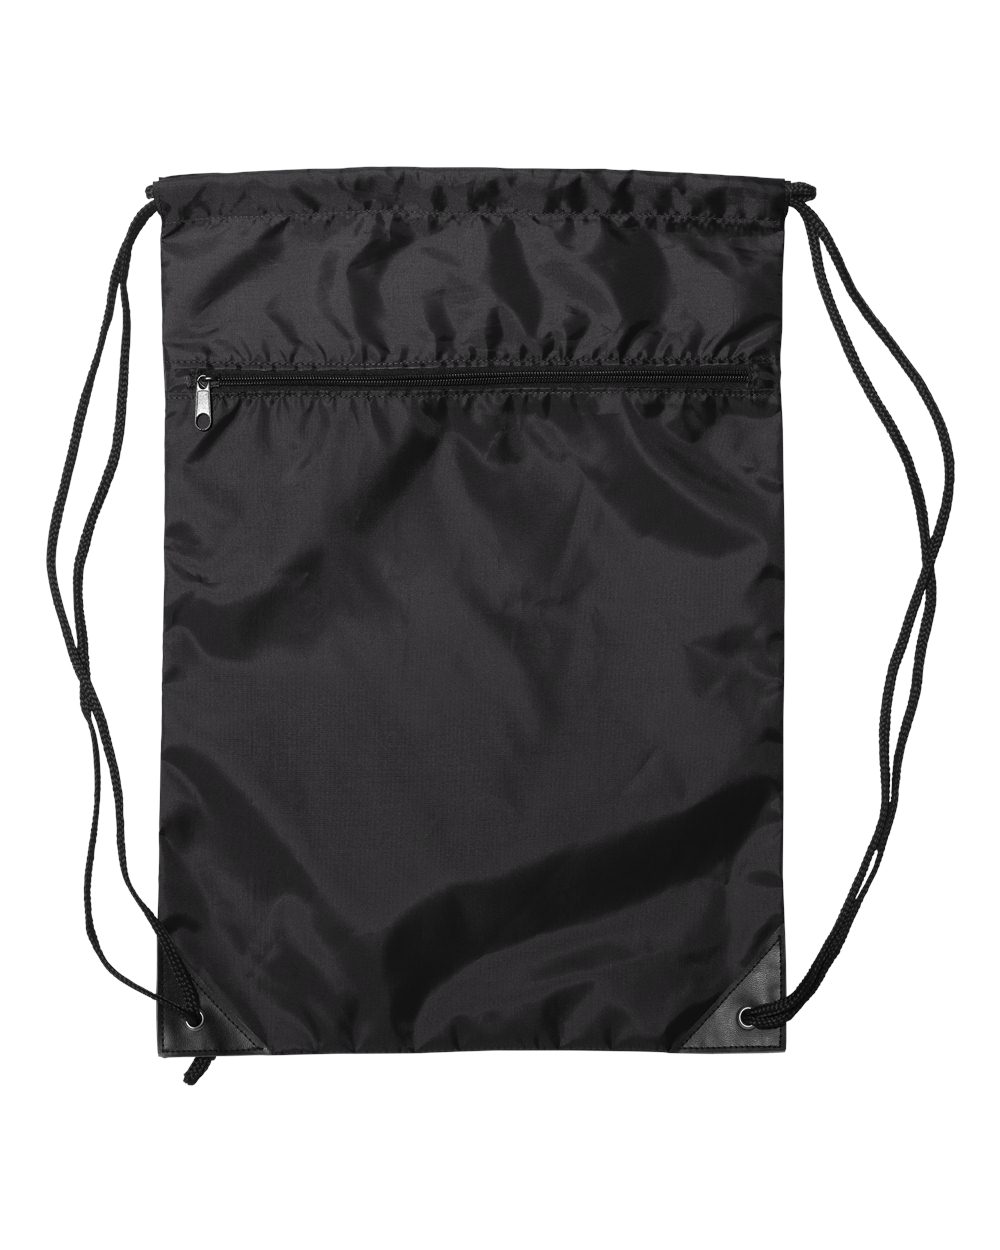 Liberty Bags Zippered Drawstring Backpack - image 1 of 3